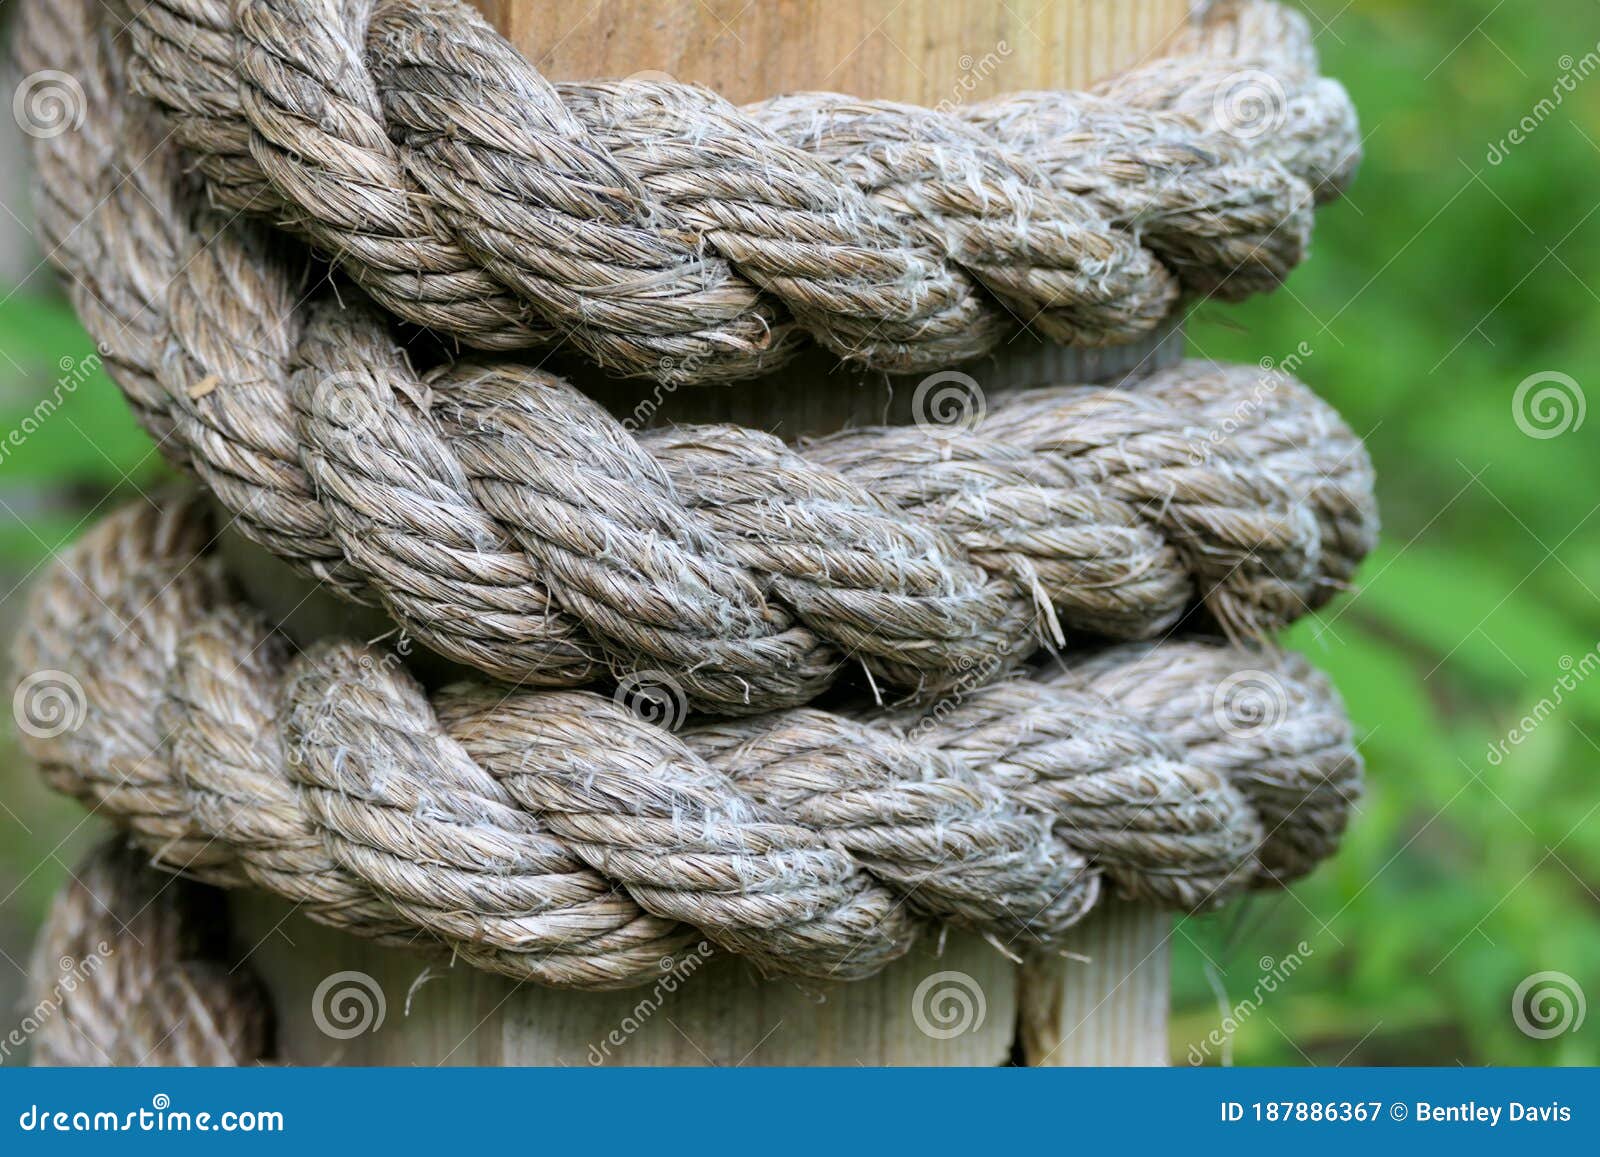 https://thumbs.dreamstime.com/z/thick-twine-rope-wrapped-around-wooden-post-three-times-wood-pole-187886367.jpg